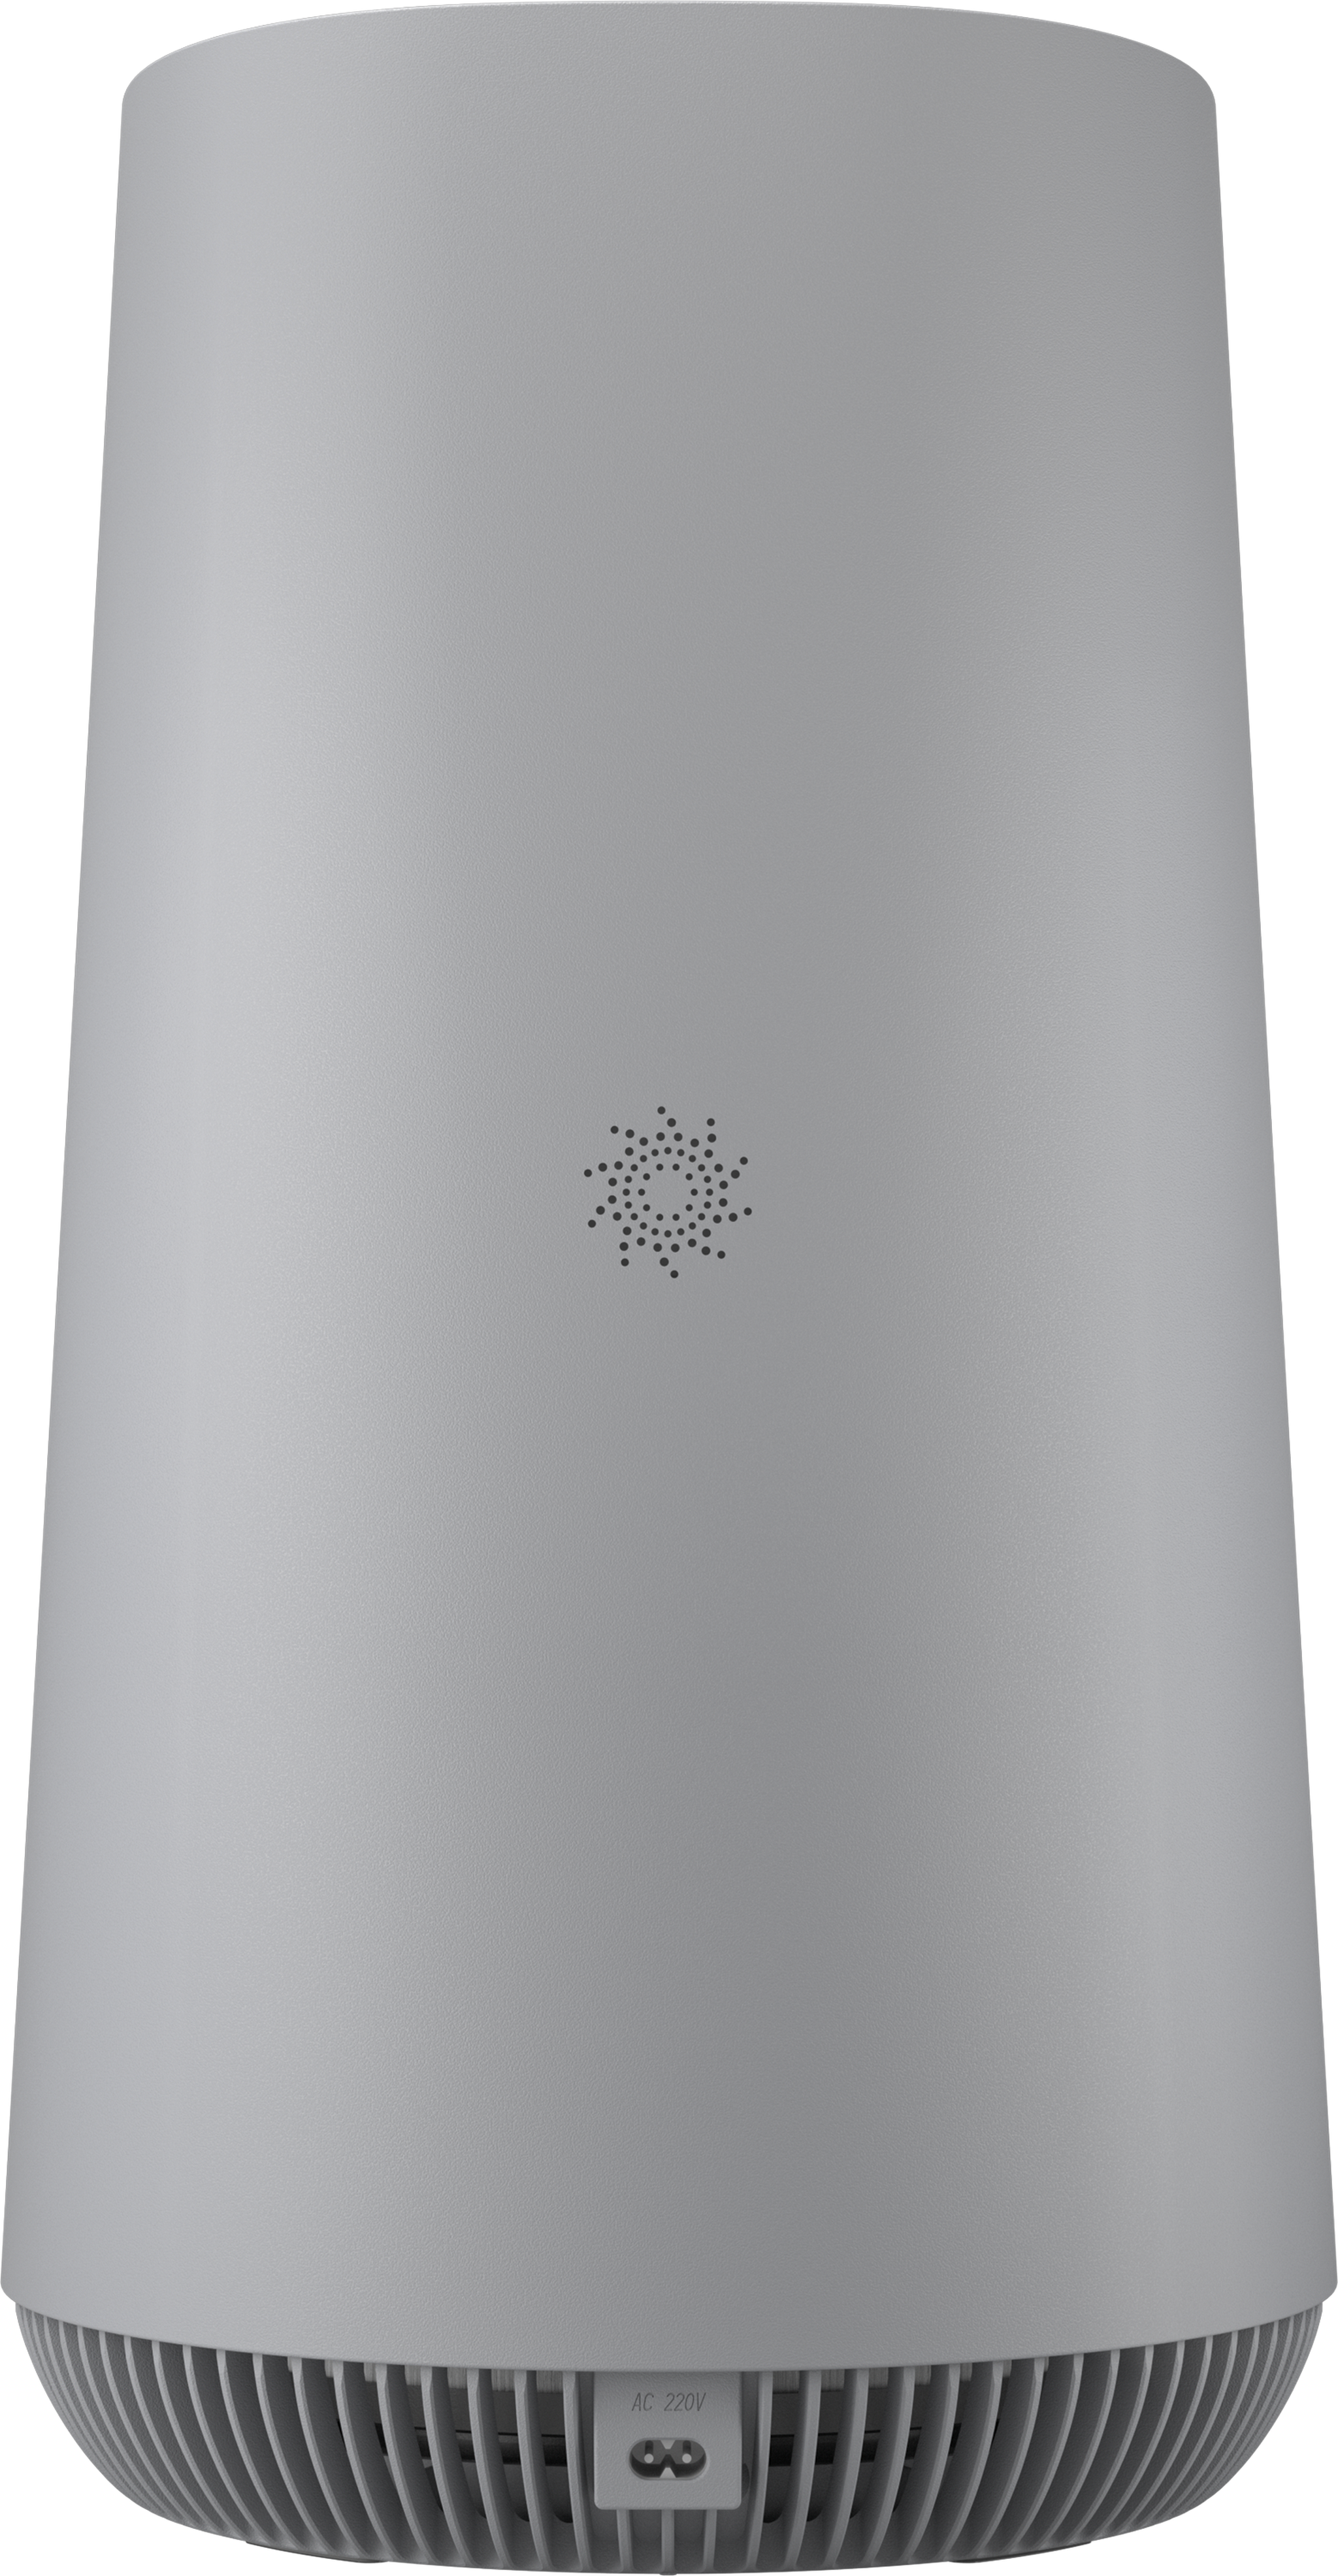 Electrolux Air Purifier (FA31-202GY)